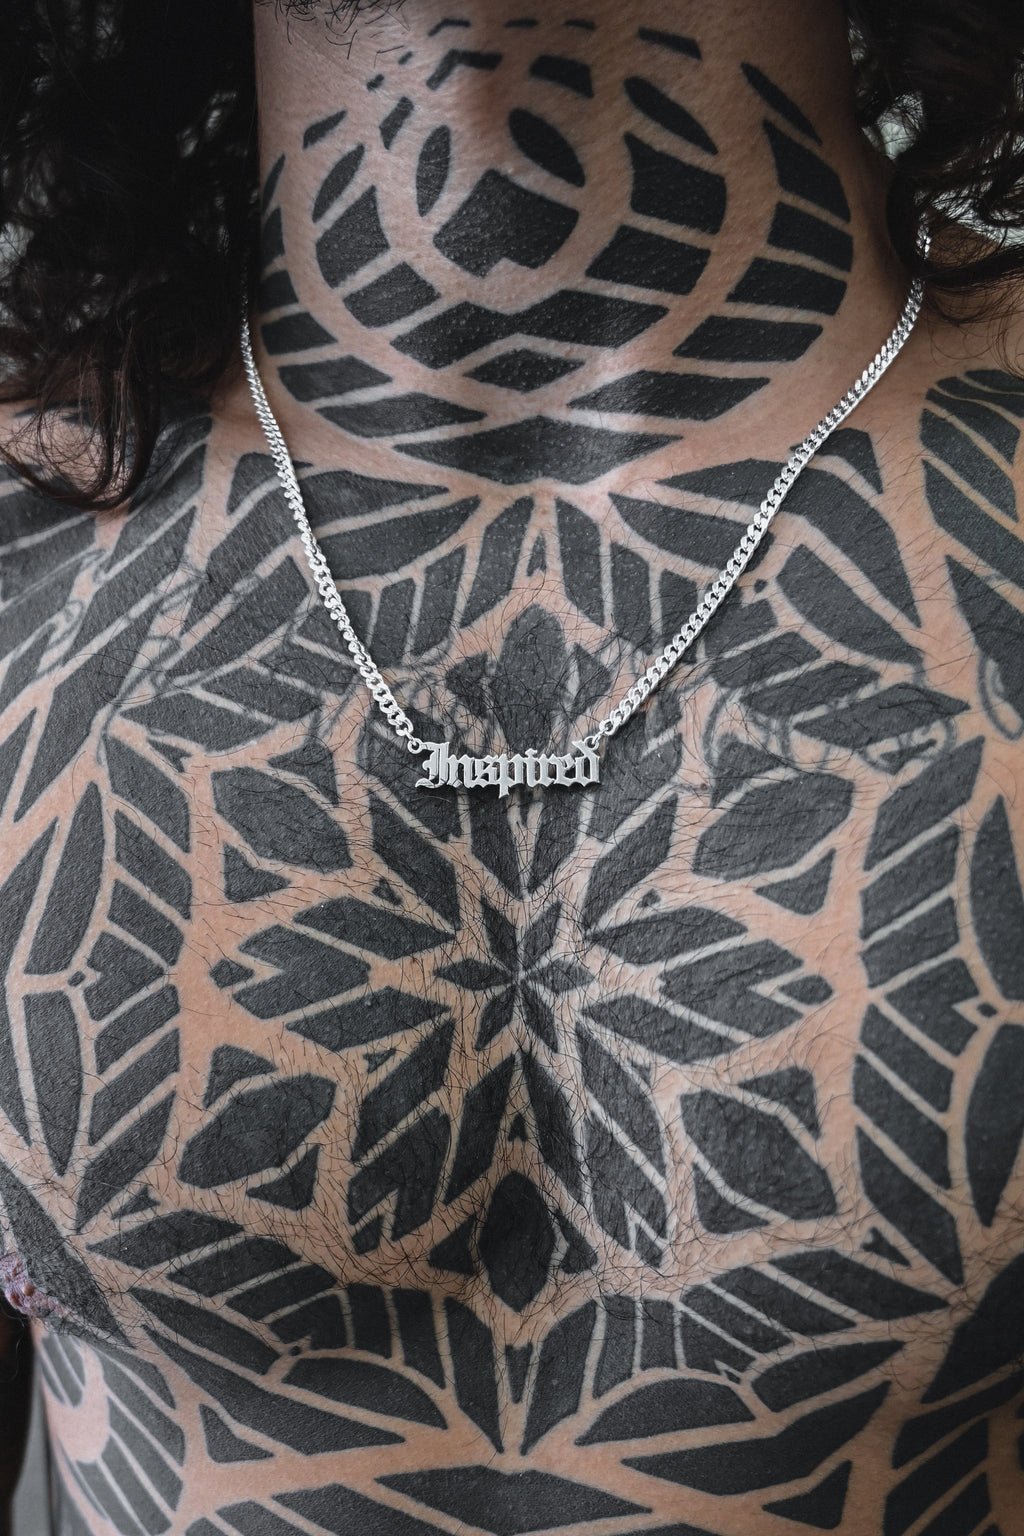 inspired name plate necklace